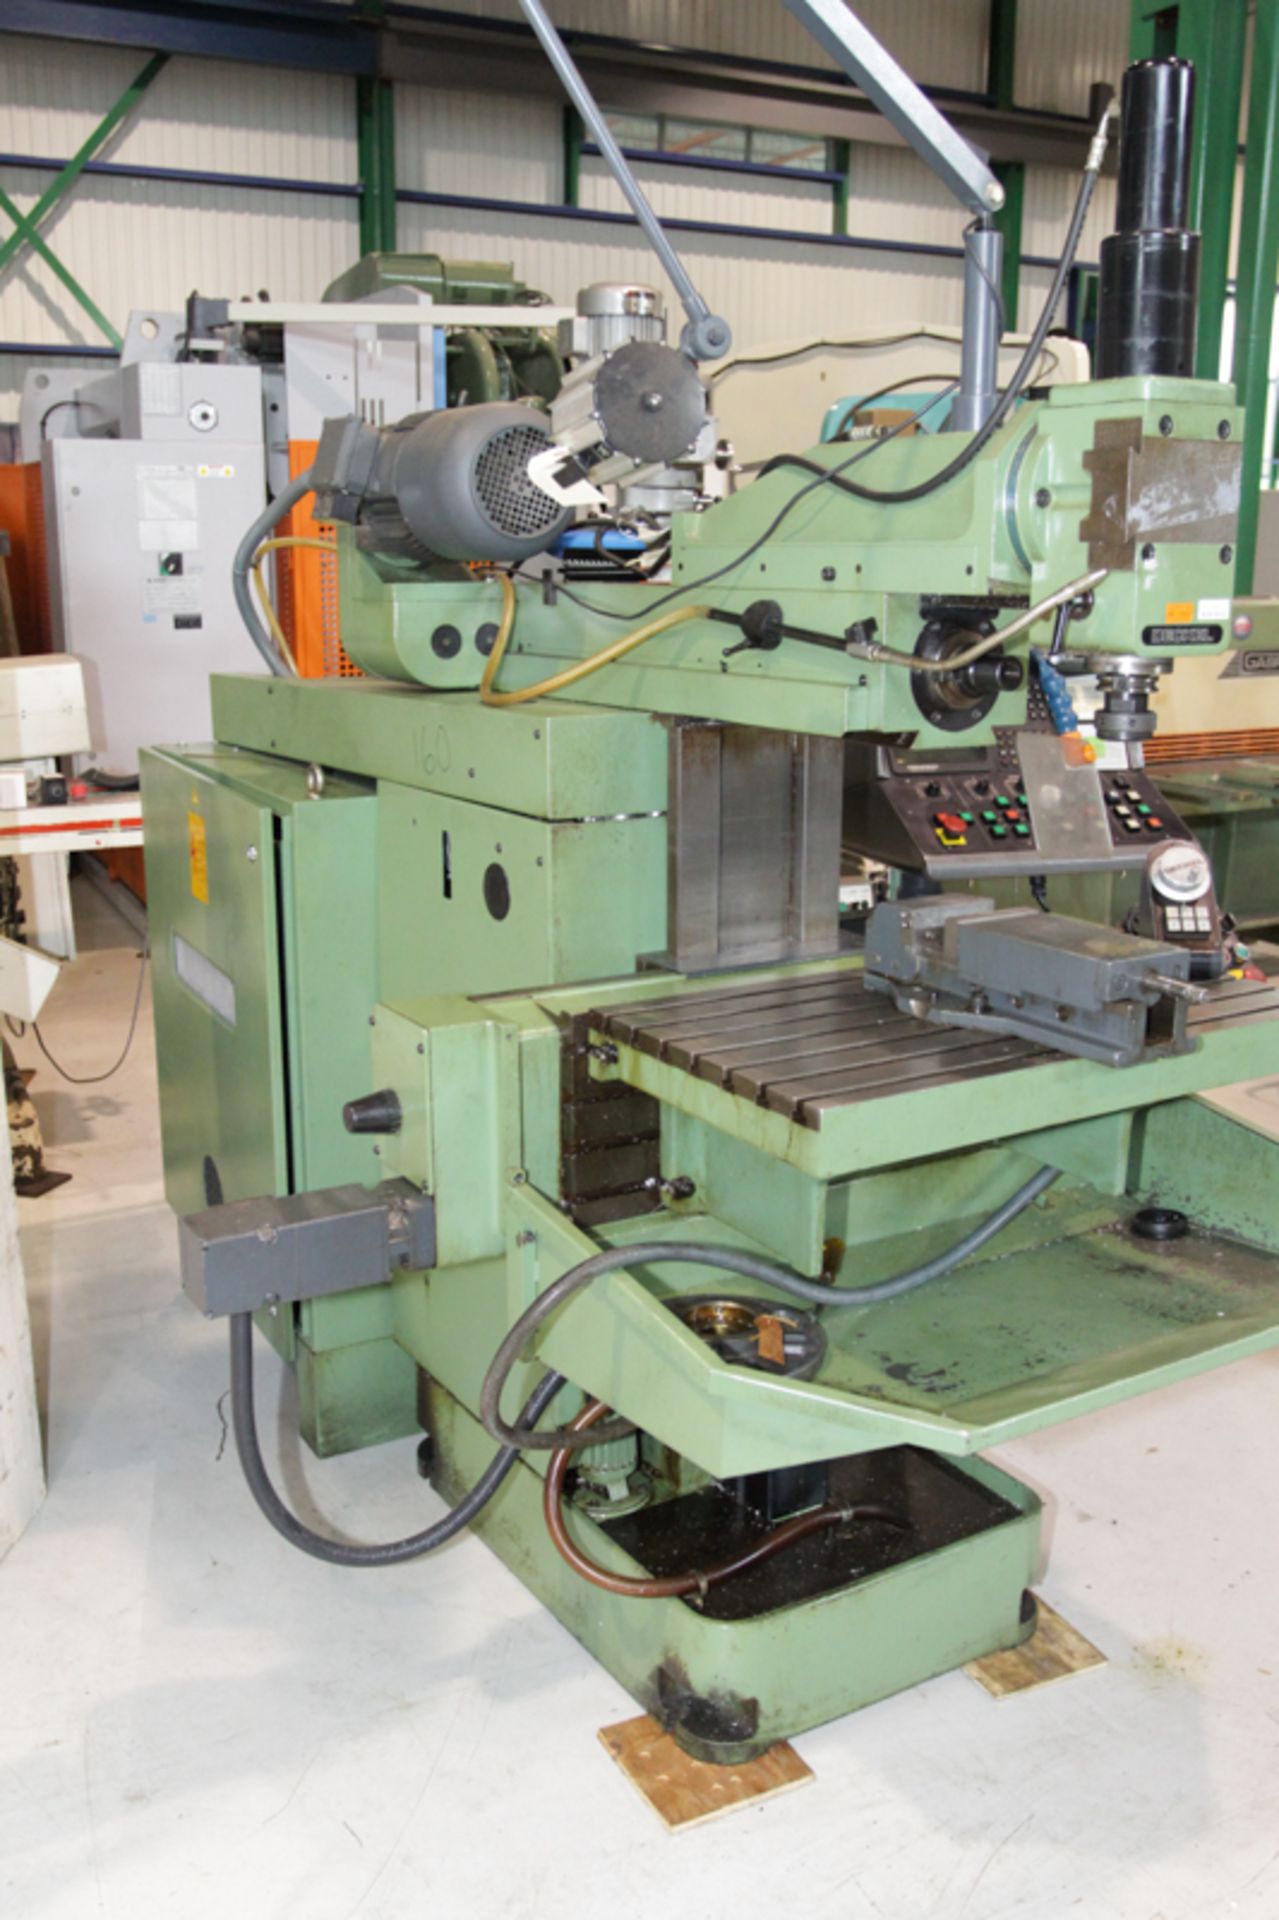 DECKEL CNC MILLING MACHINE MOD FP-4A, 18" X 32" TABLE, GRUNDING CNC CONTROL, W/ ASSORTED TOOL - Image 14 of 14